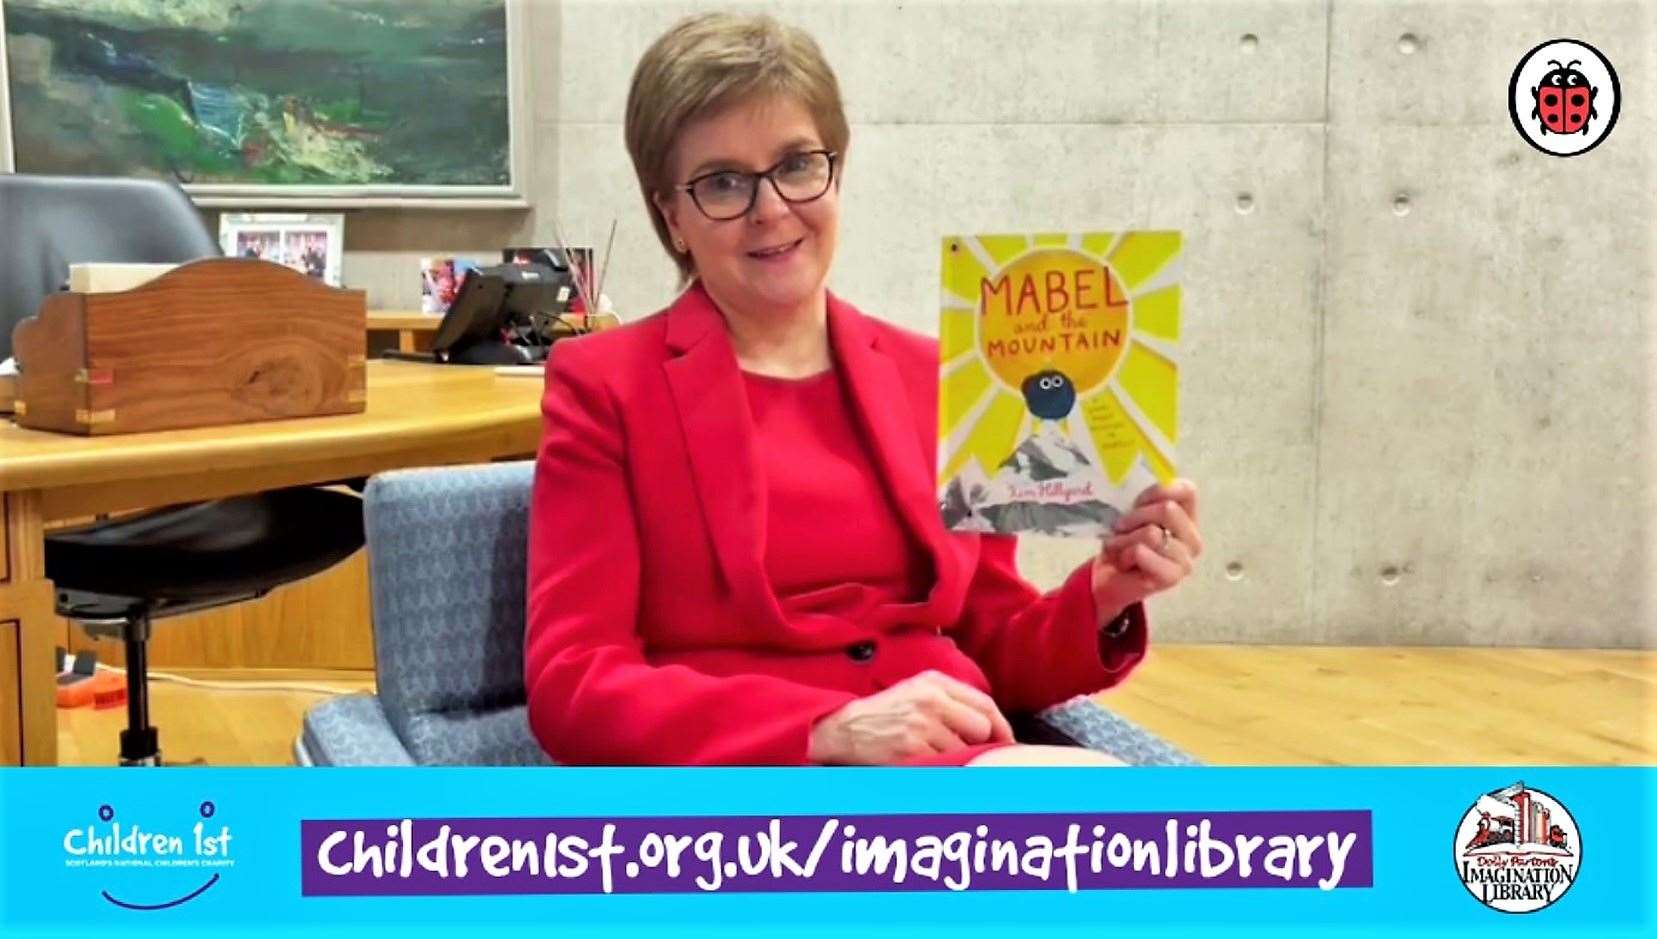 NIcola Sturgeon reads Mabel and the Mountain for the Children 1st and Imagination Library.